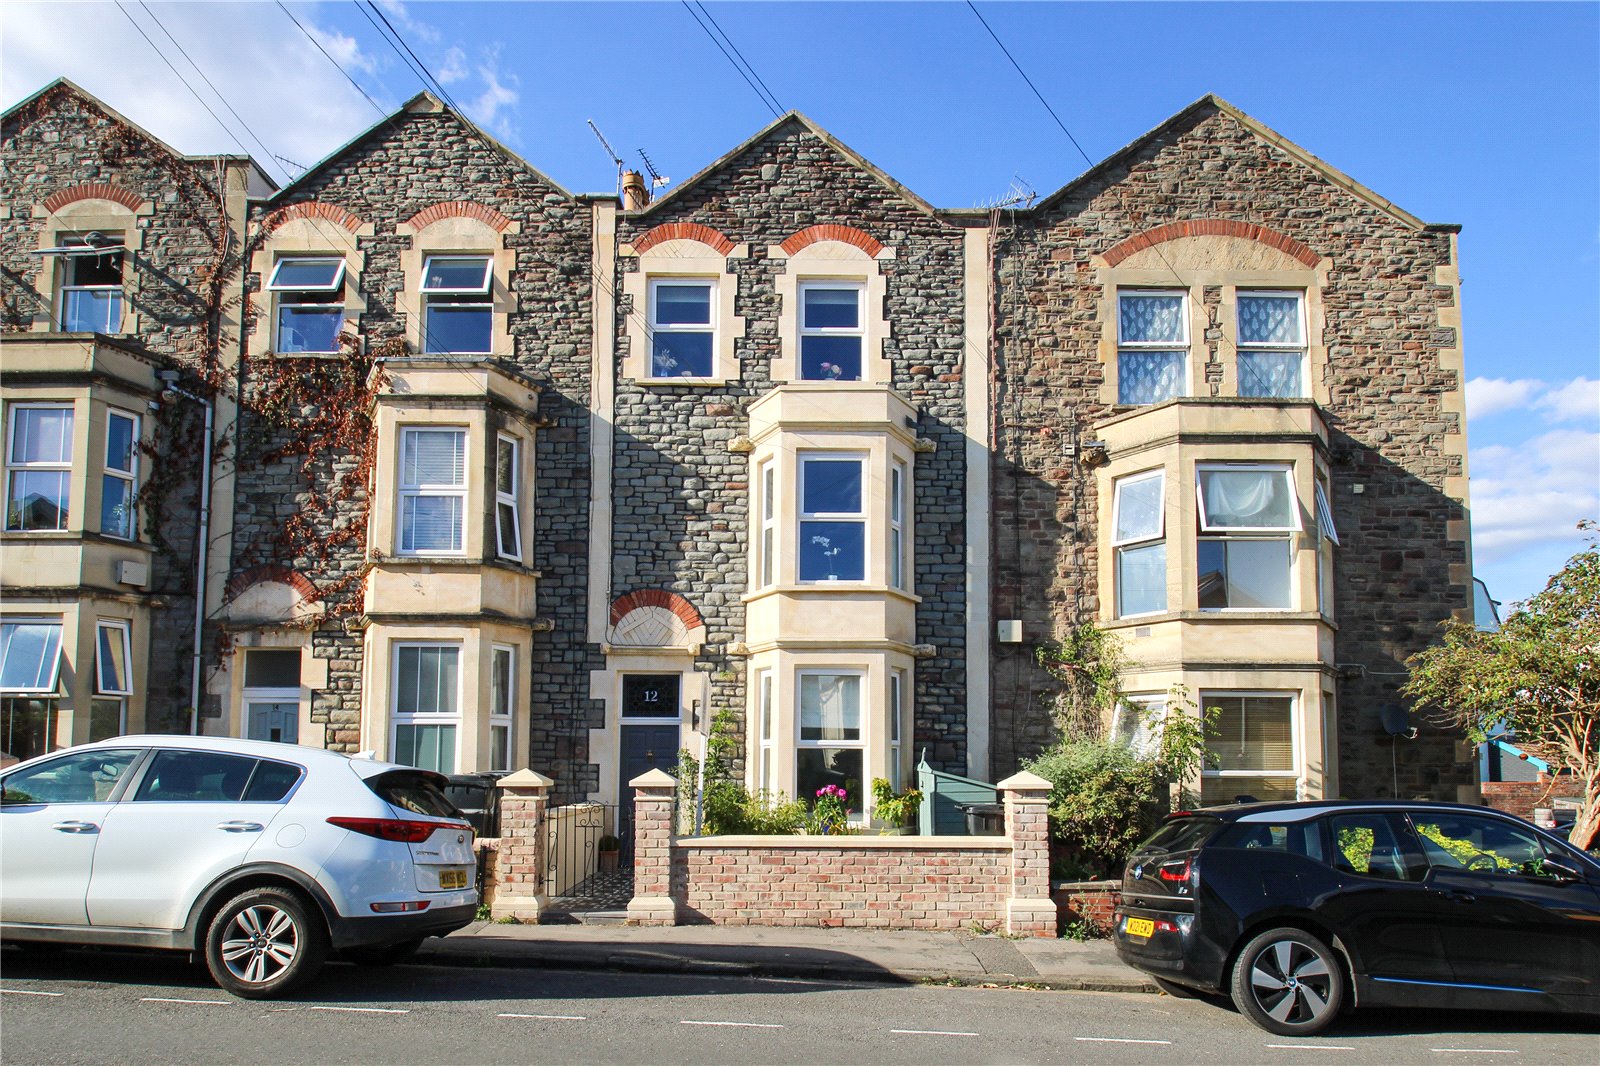 Stackpool Road, Southville, Bristol BS3